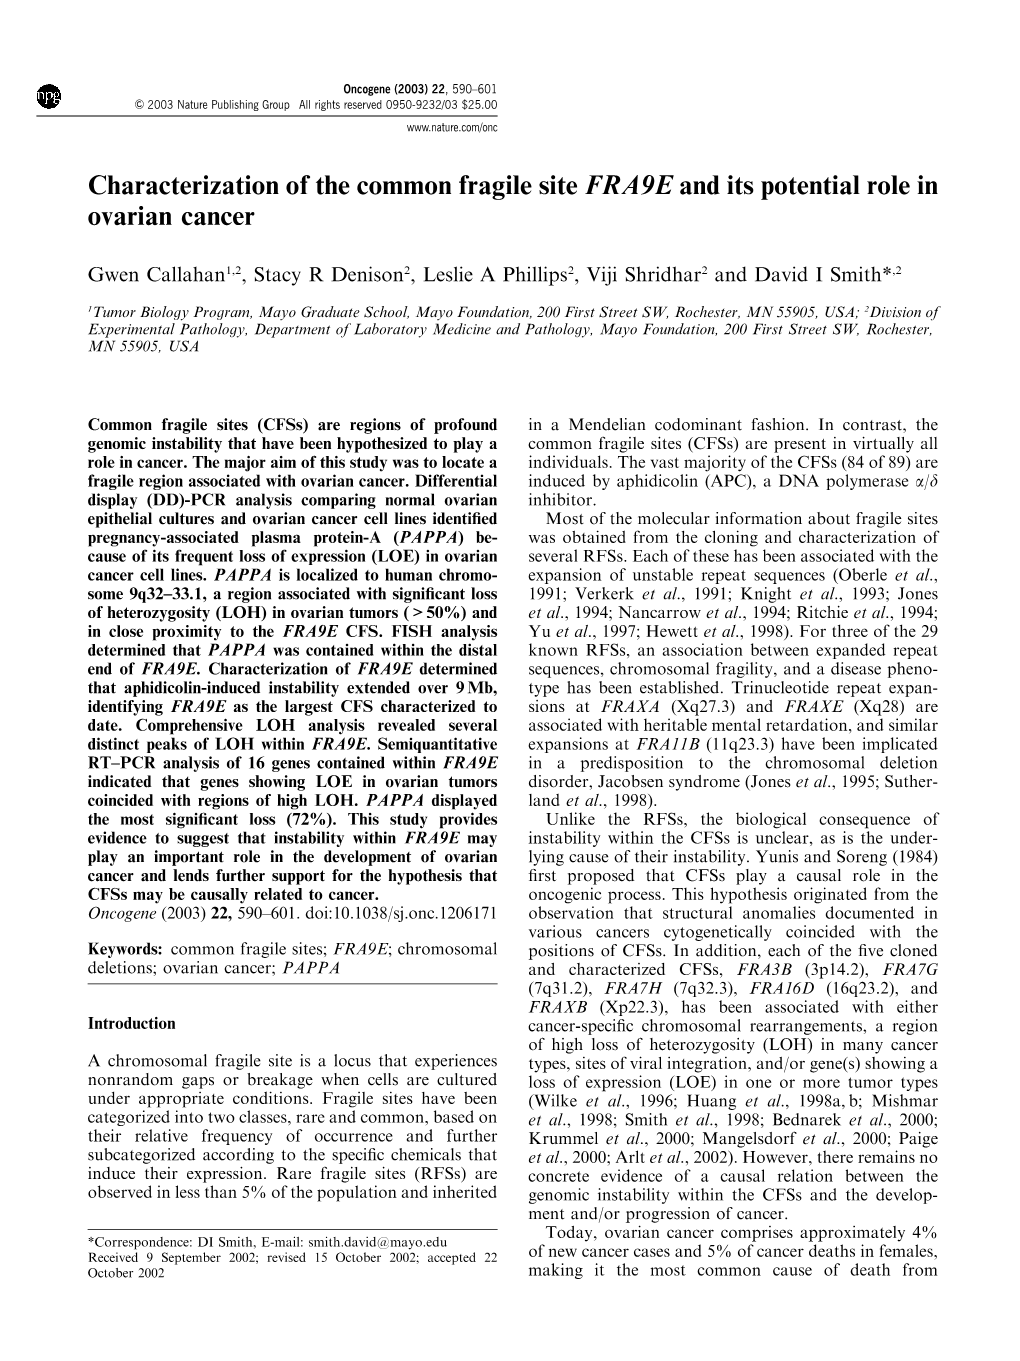 Characterization of the Common Fragile Site FRA9E and Its Potential Role in Ovarian Cancer